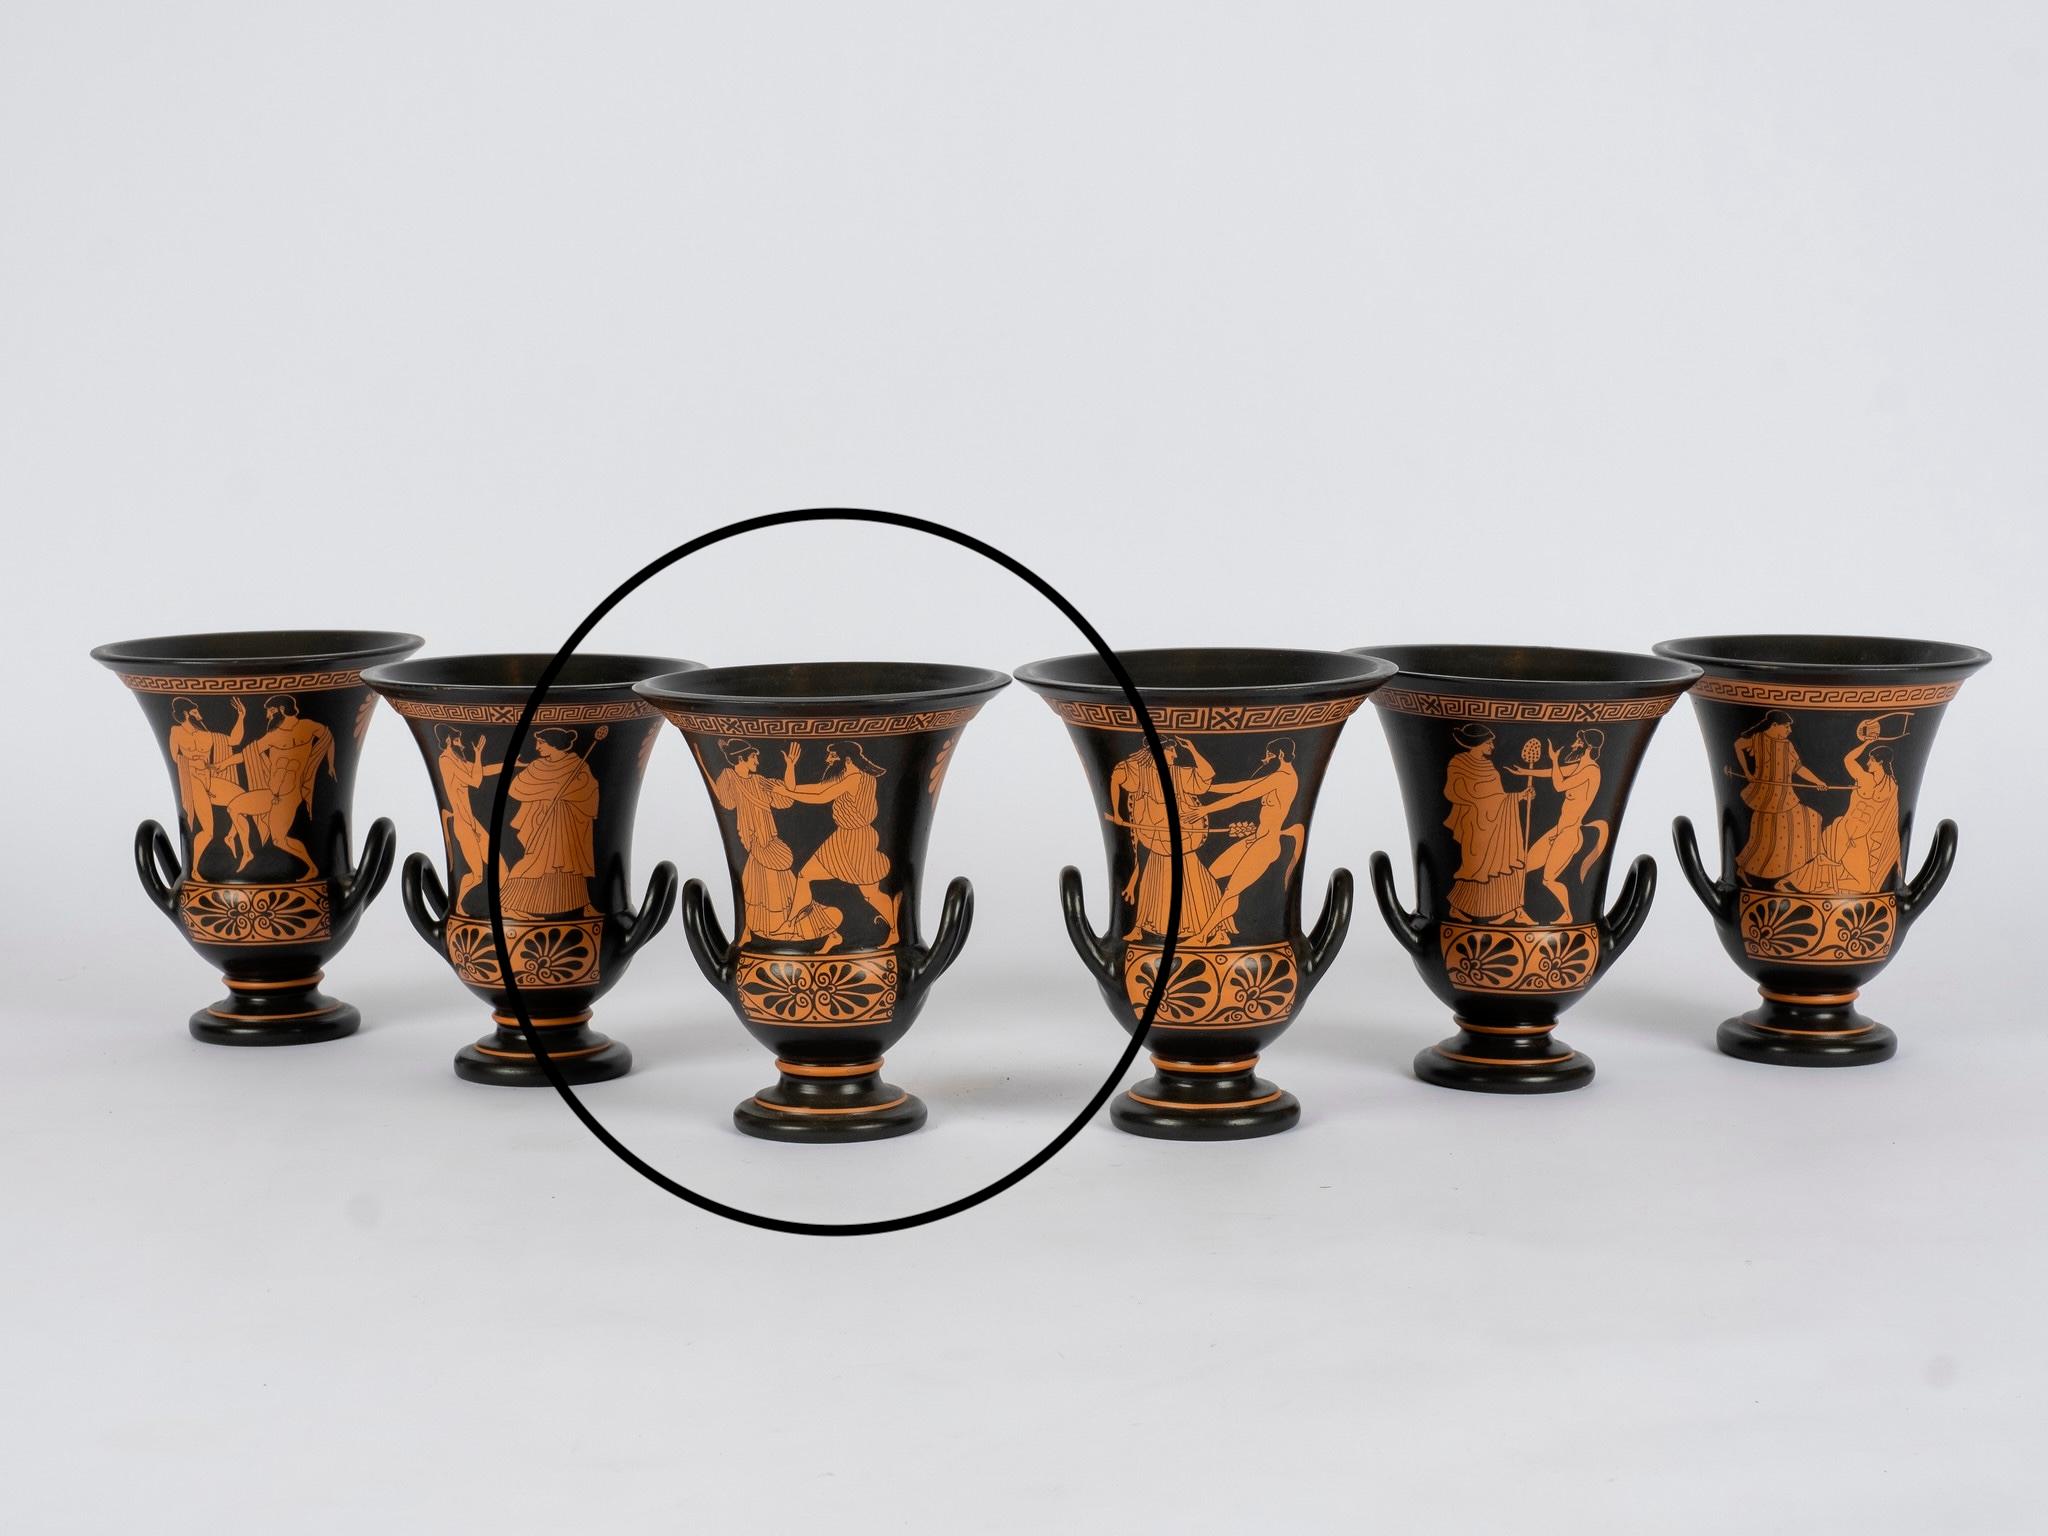 Mid 20th century Attica terra cotta kalyx-kraters featuring gods and goddesses in early Classical Greek scenes. Two handle bowls were made for mixing wine and water and named after the shape of the calyx on a flower. 